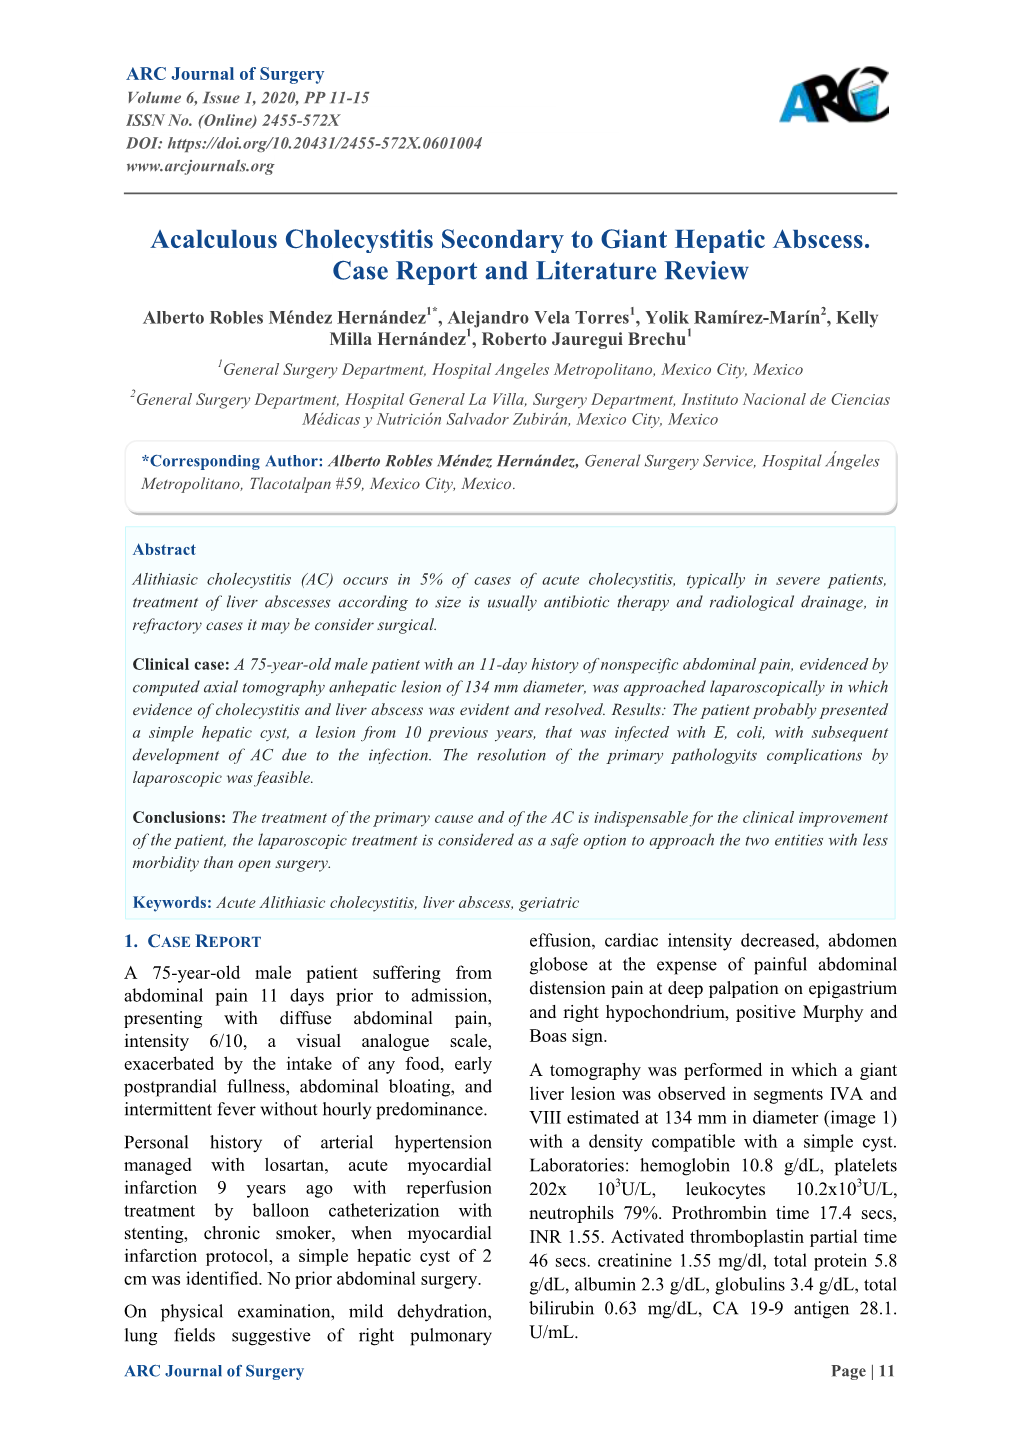 Acalculous Cholecystitis Secondary to Giant Hepatic Abscess. Case Report and Literature Review